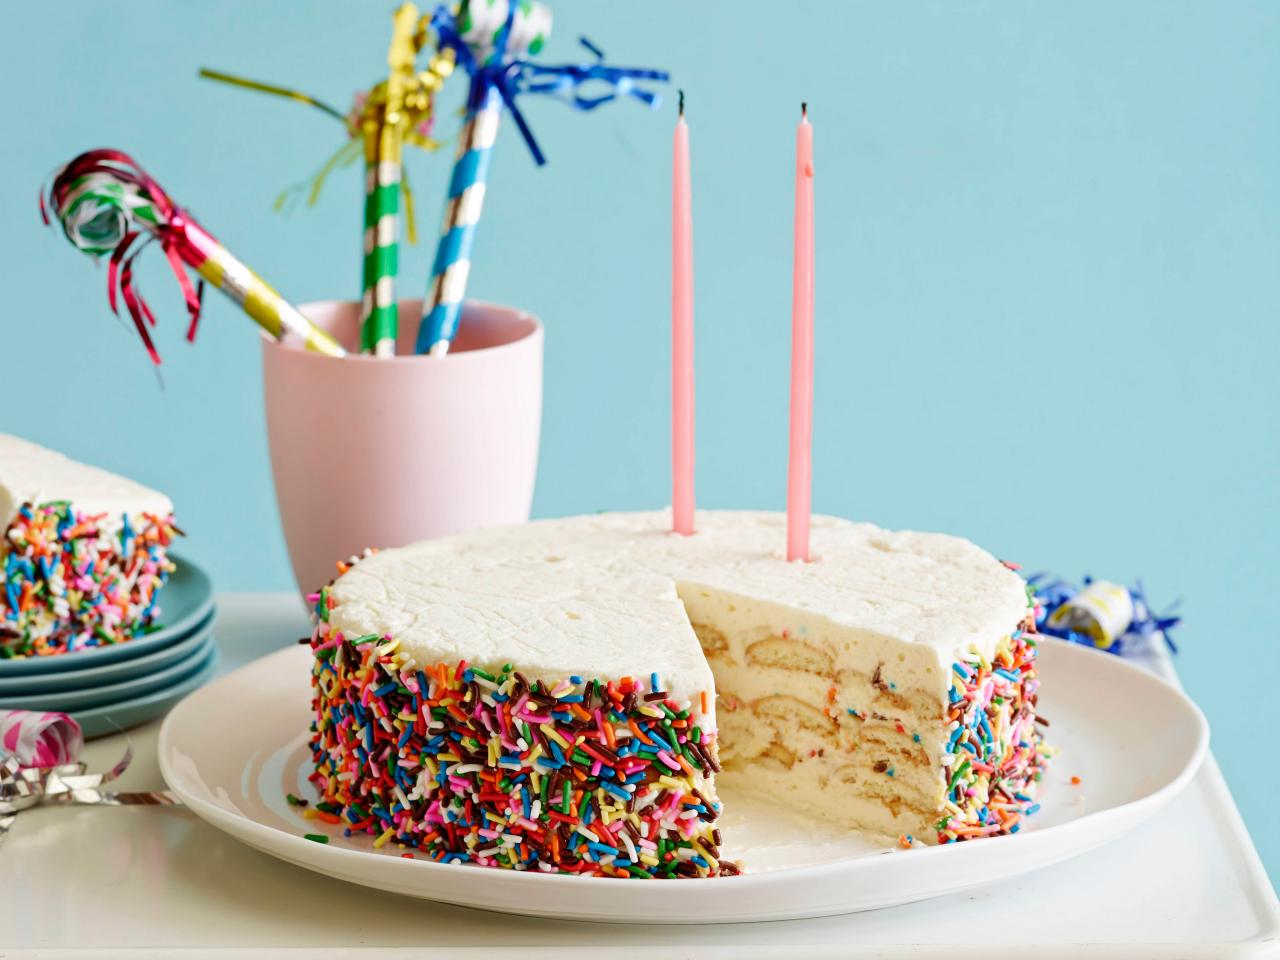 Easy Birthday Cake Recipe From Scratch - Southern Plate